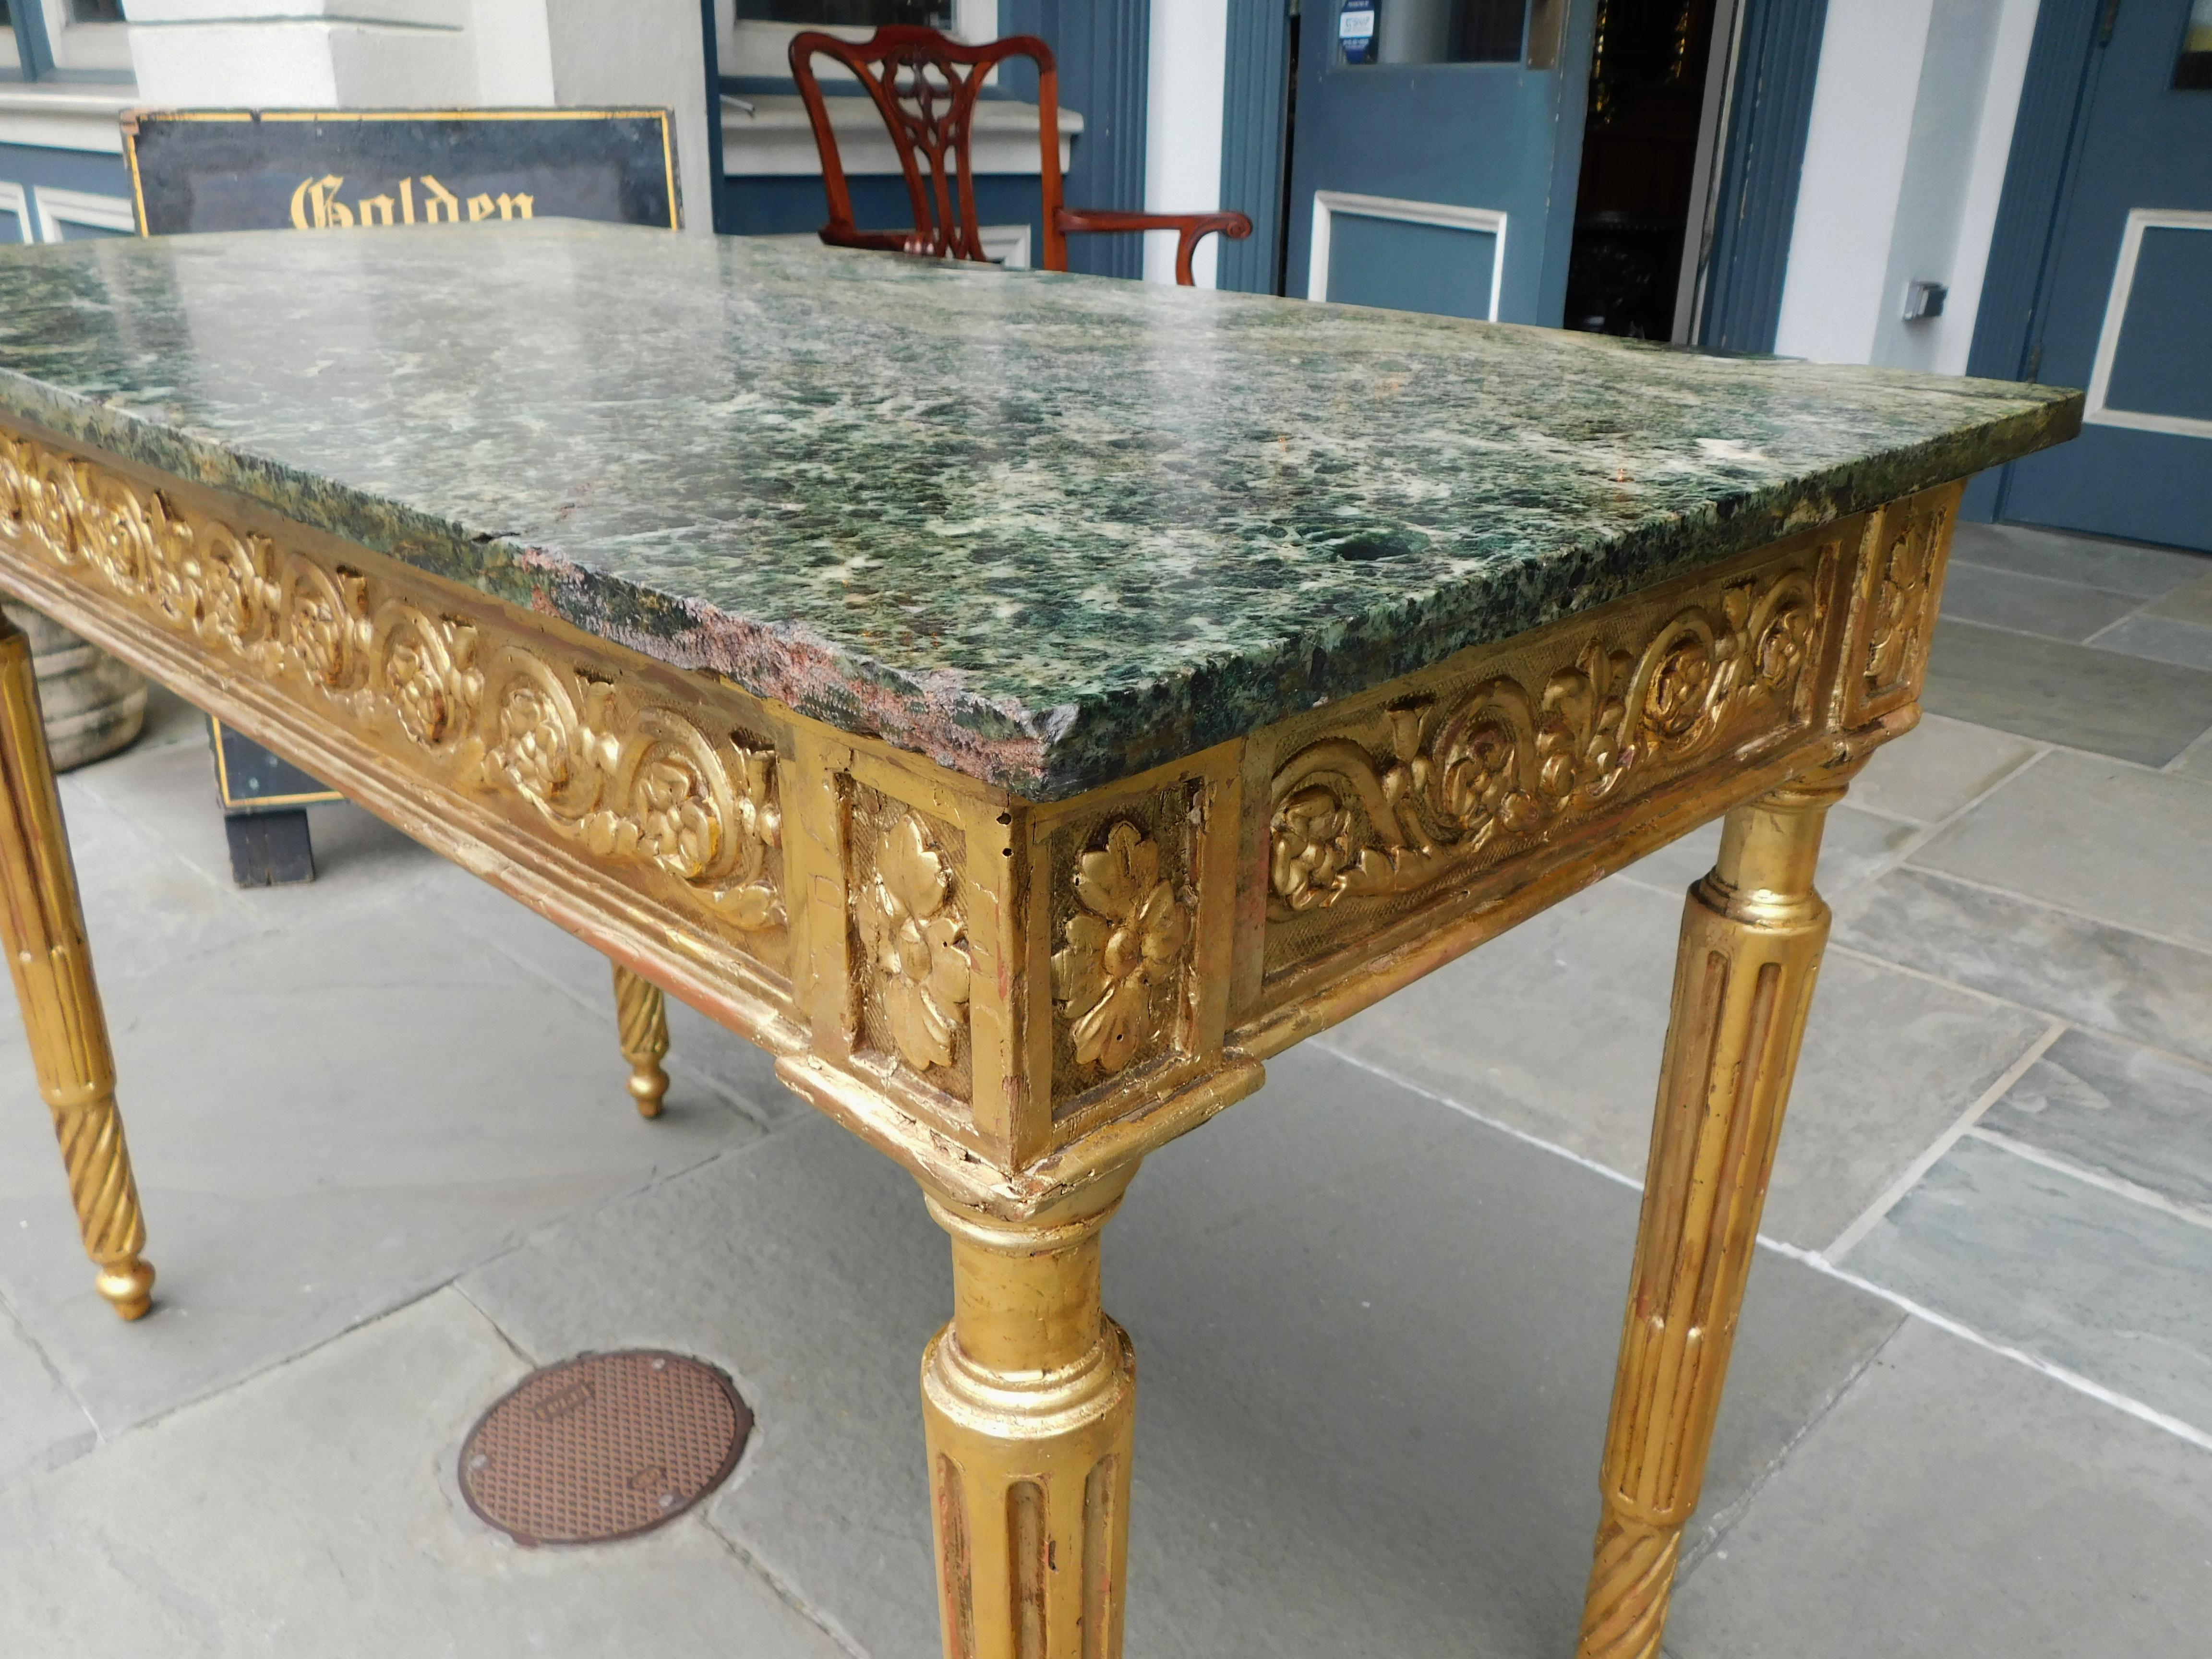 Italian Gilt Wood Marble Top Foliage Console Table with Fluted Legs, Circa 1770 For Sale 4